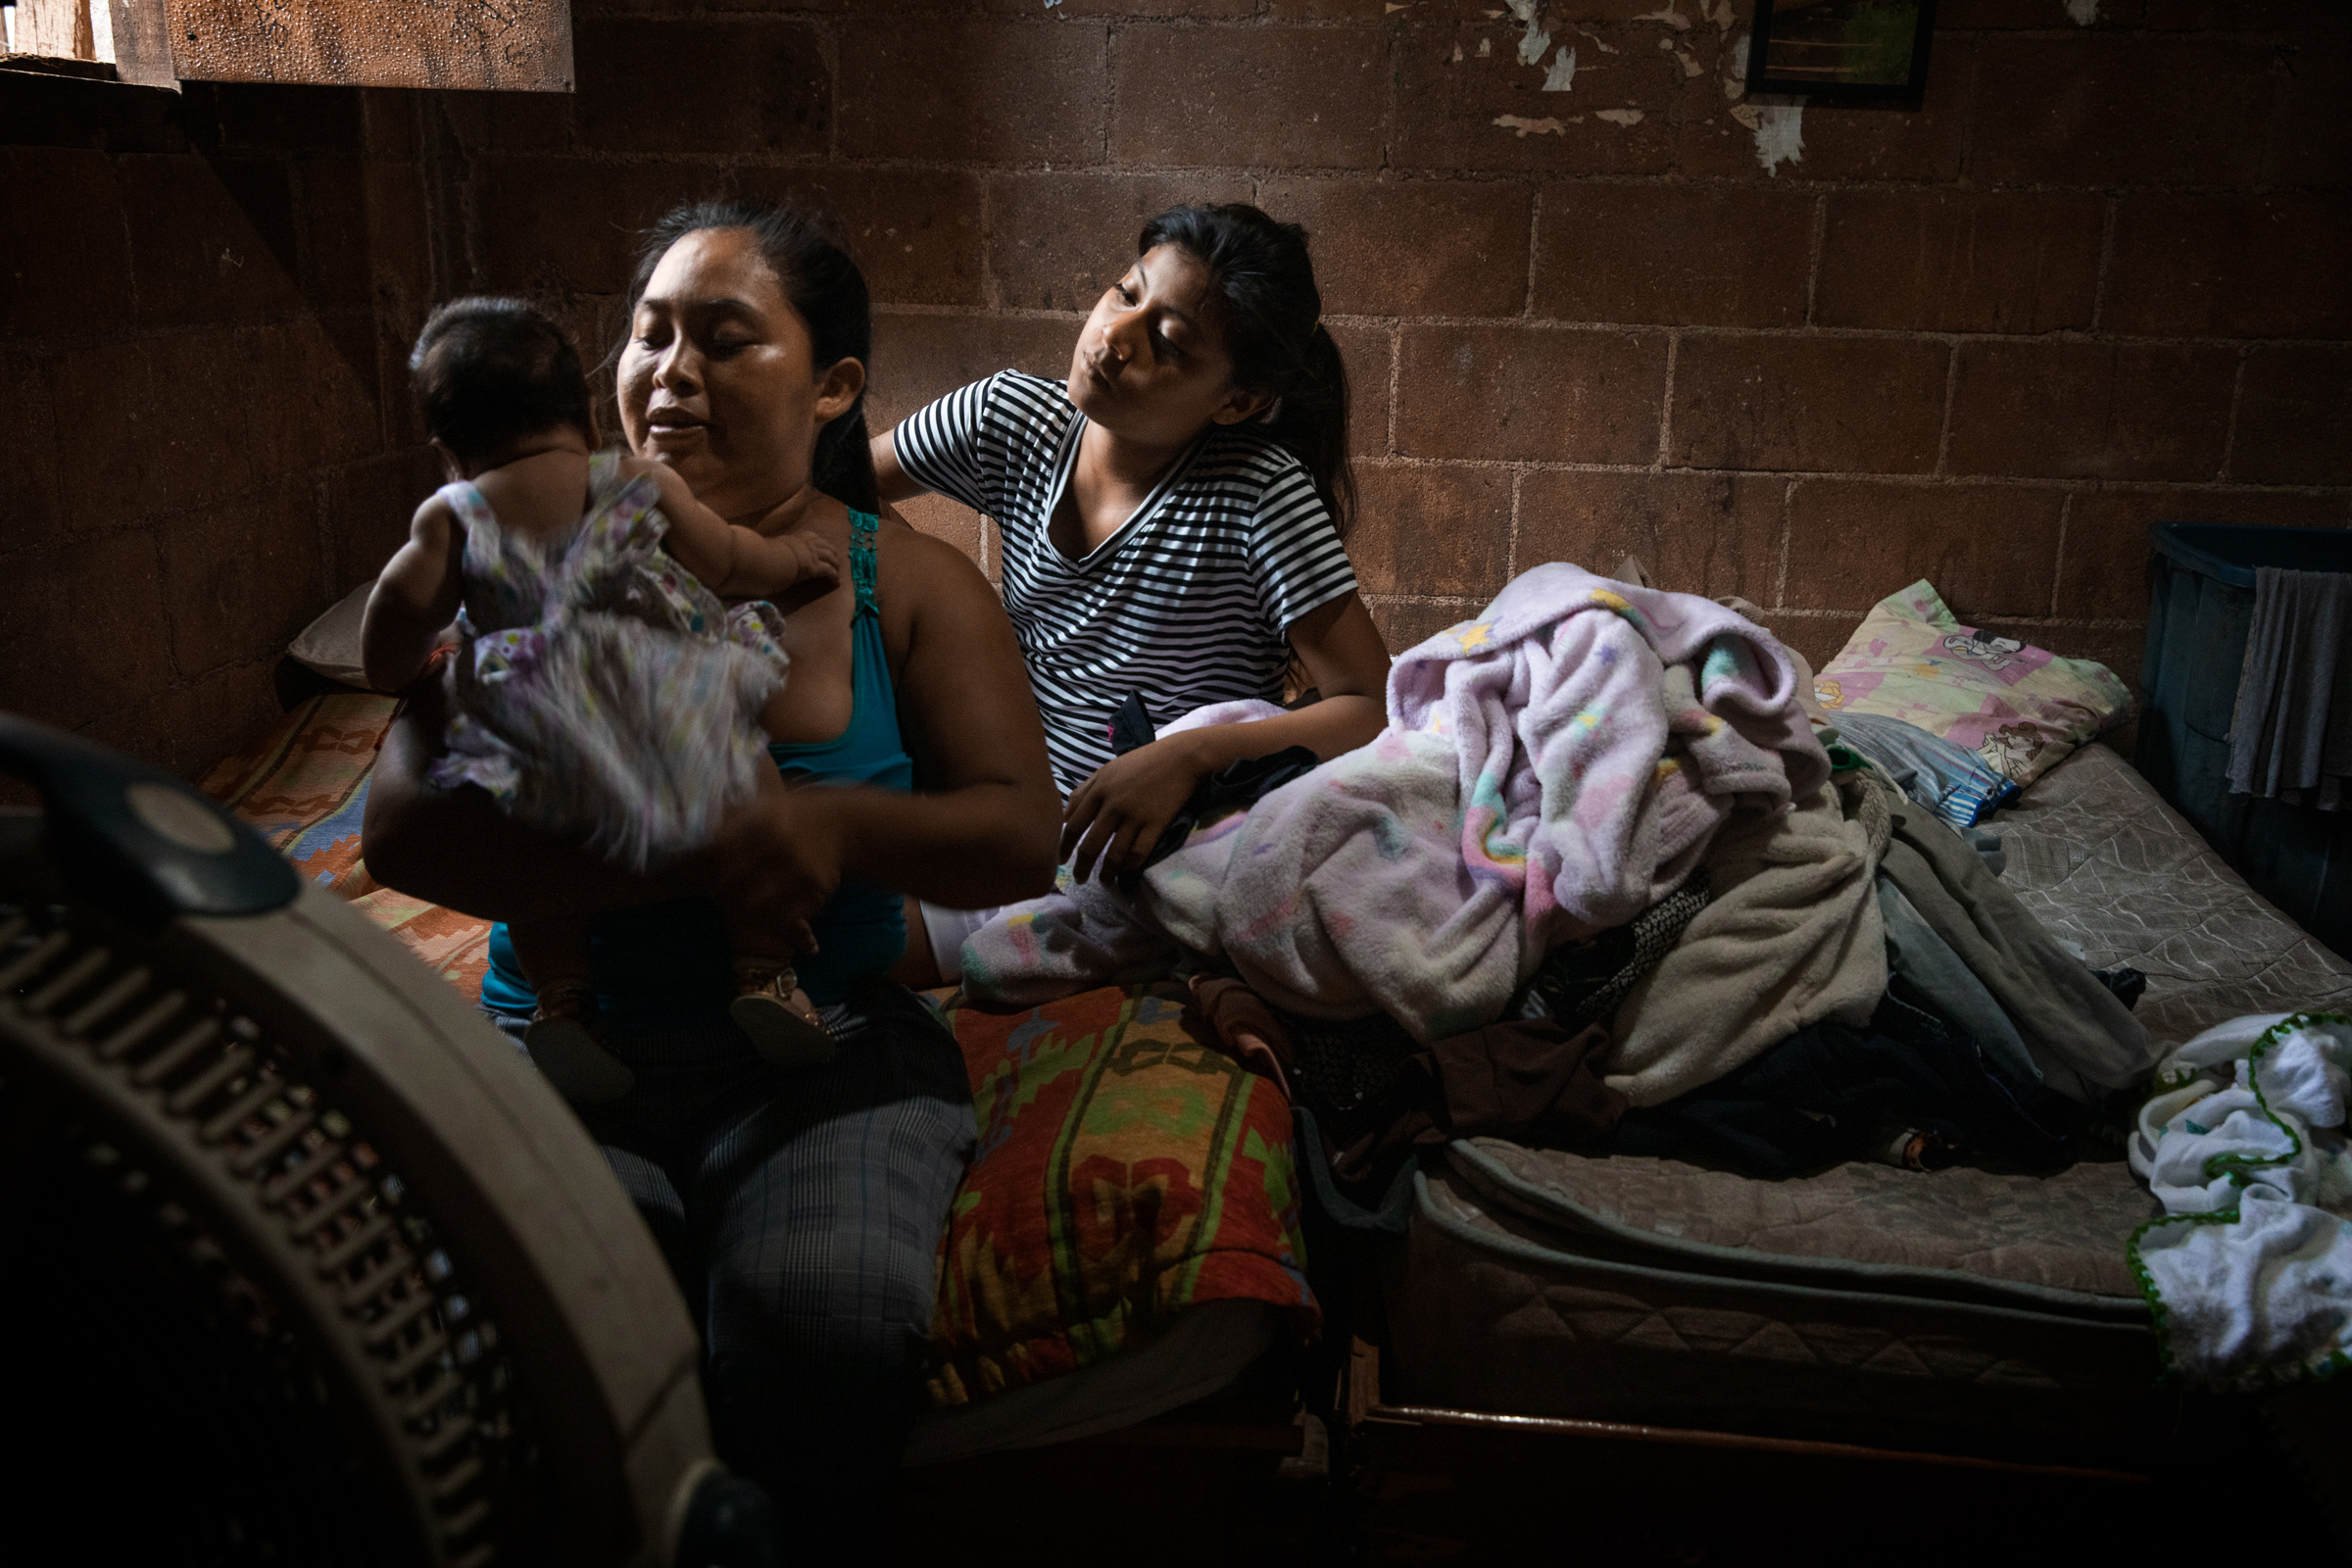 Heidi Hernandez, 29, and her sister Julisa, with Heidi's 2-month-old baby at home, in Tres Reyes, a shanty-town located on the outskirts of Cancún, on Oct. 16. Heidi's baby was due in the middle of the pandemic, but no midwife wanted to help her deliver at home, so Heidi ended up giving birth in the hospital, despite her fear of the virus. (Claudia Guadarrama—Magnum Foundation for TIME)